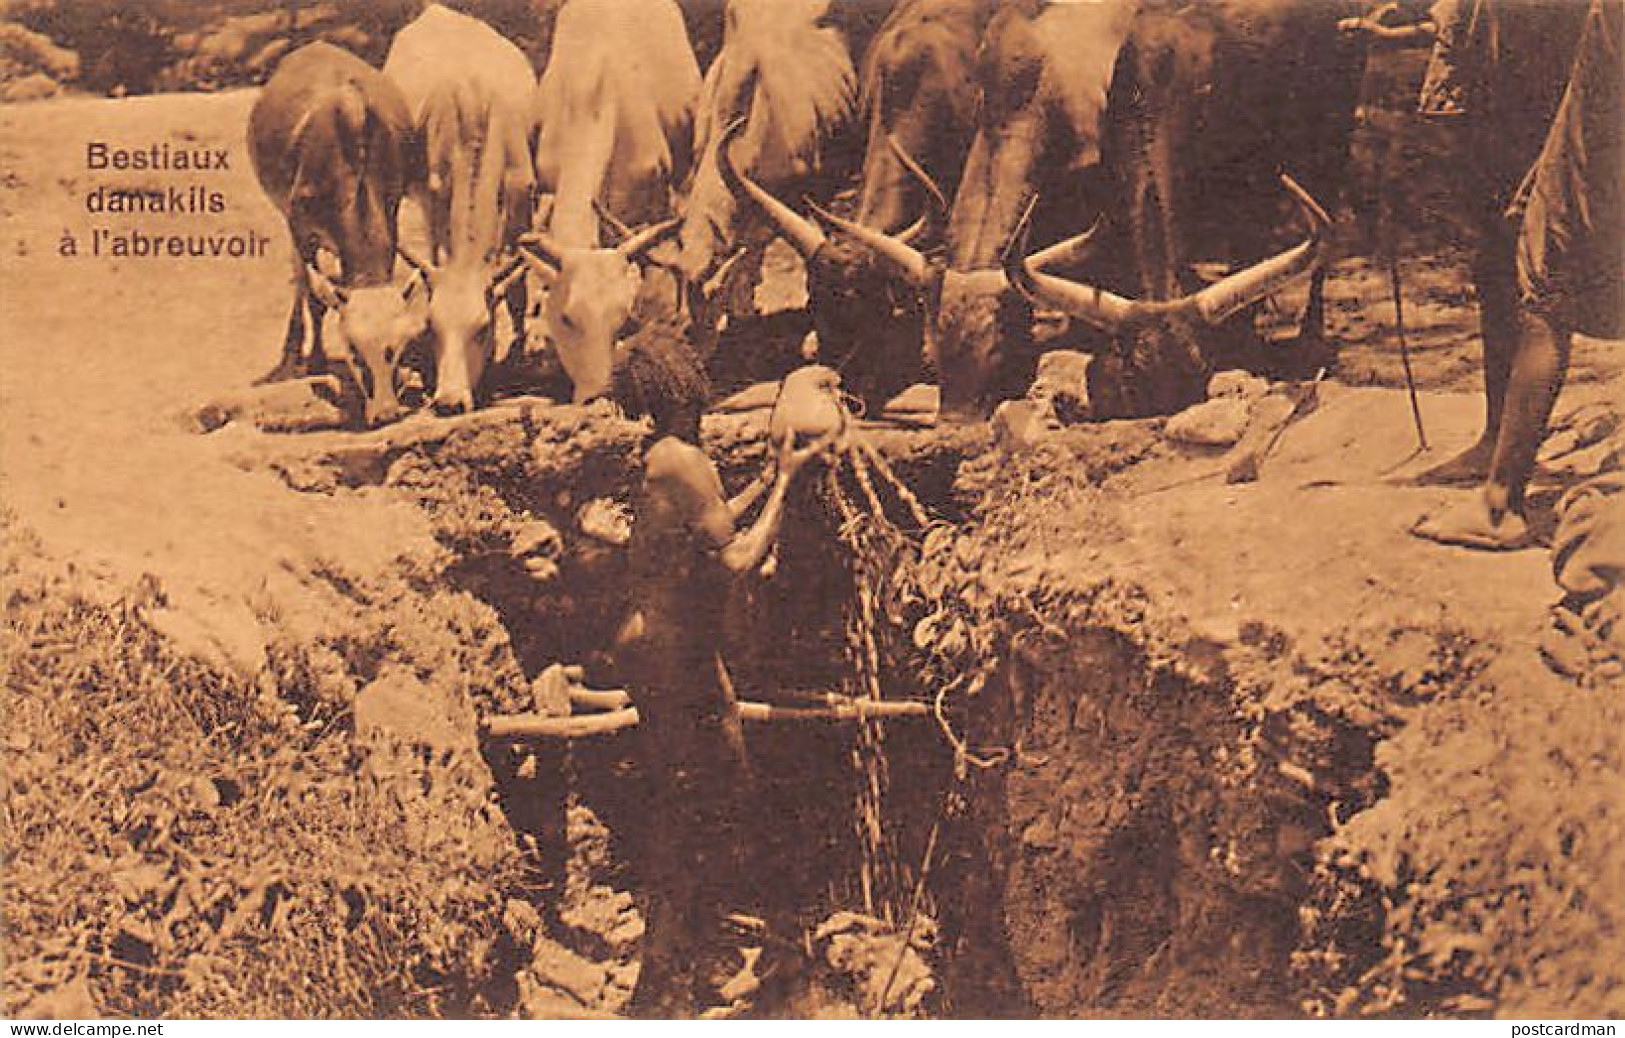 Ethiopia - Dankali Cattle At The Watering Hole - Publ. J. A. Michel 6883 - Ethiopie